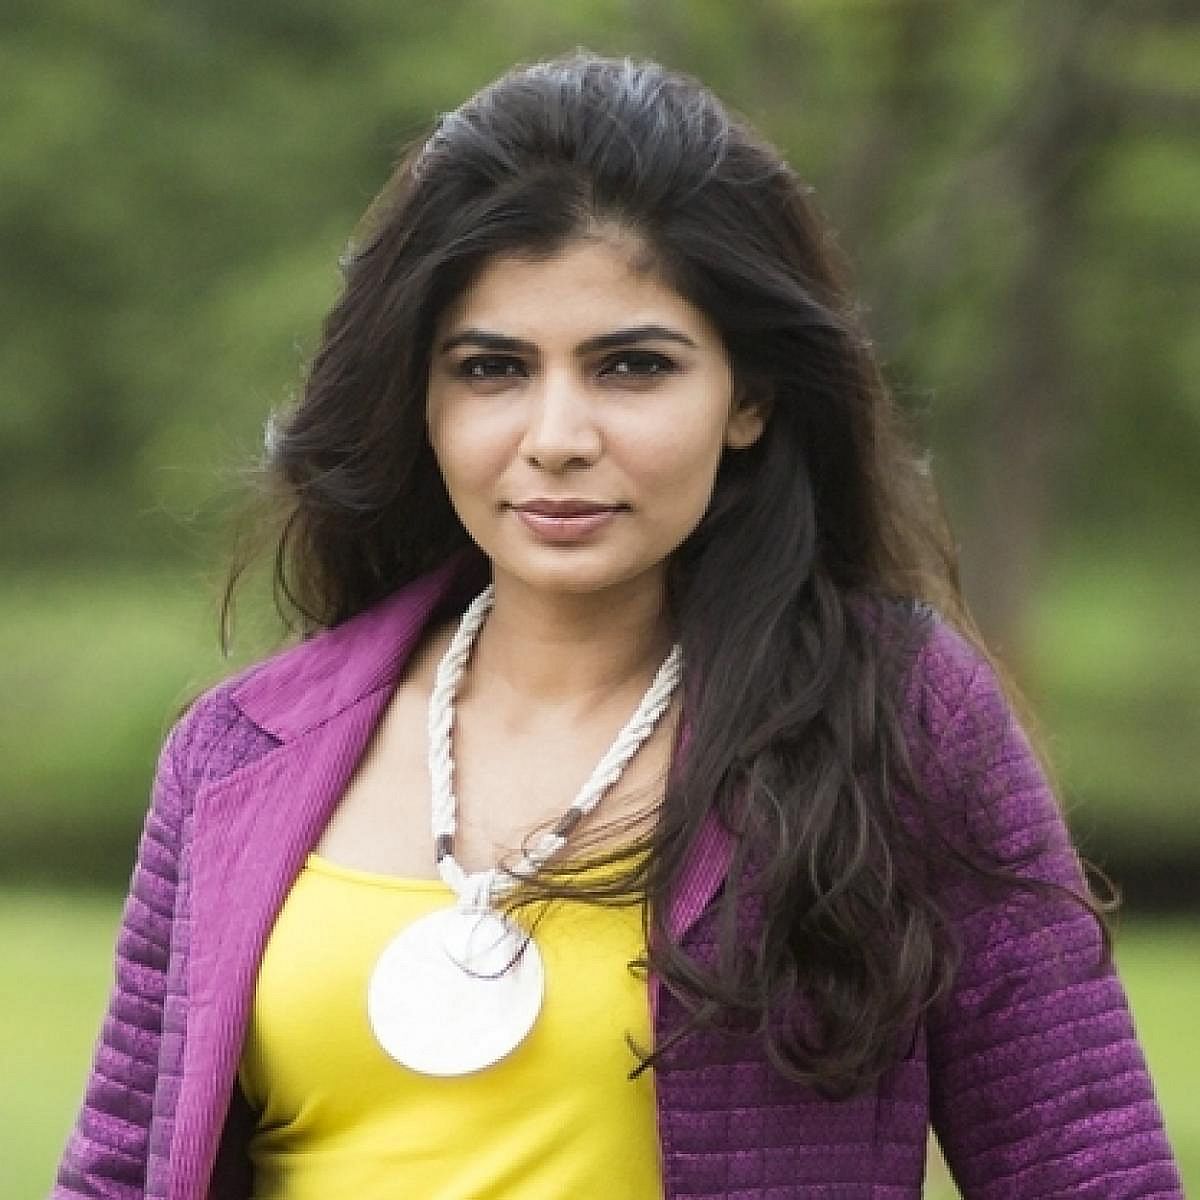 Chinmayi is tweeting about her woes from the US.